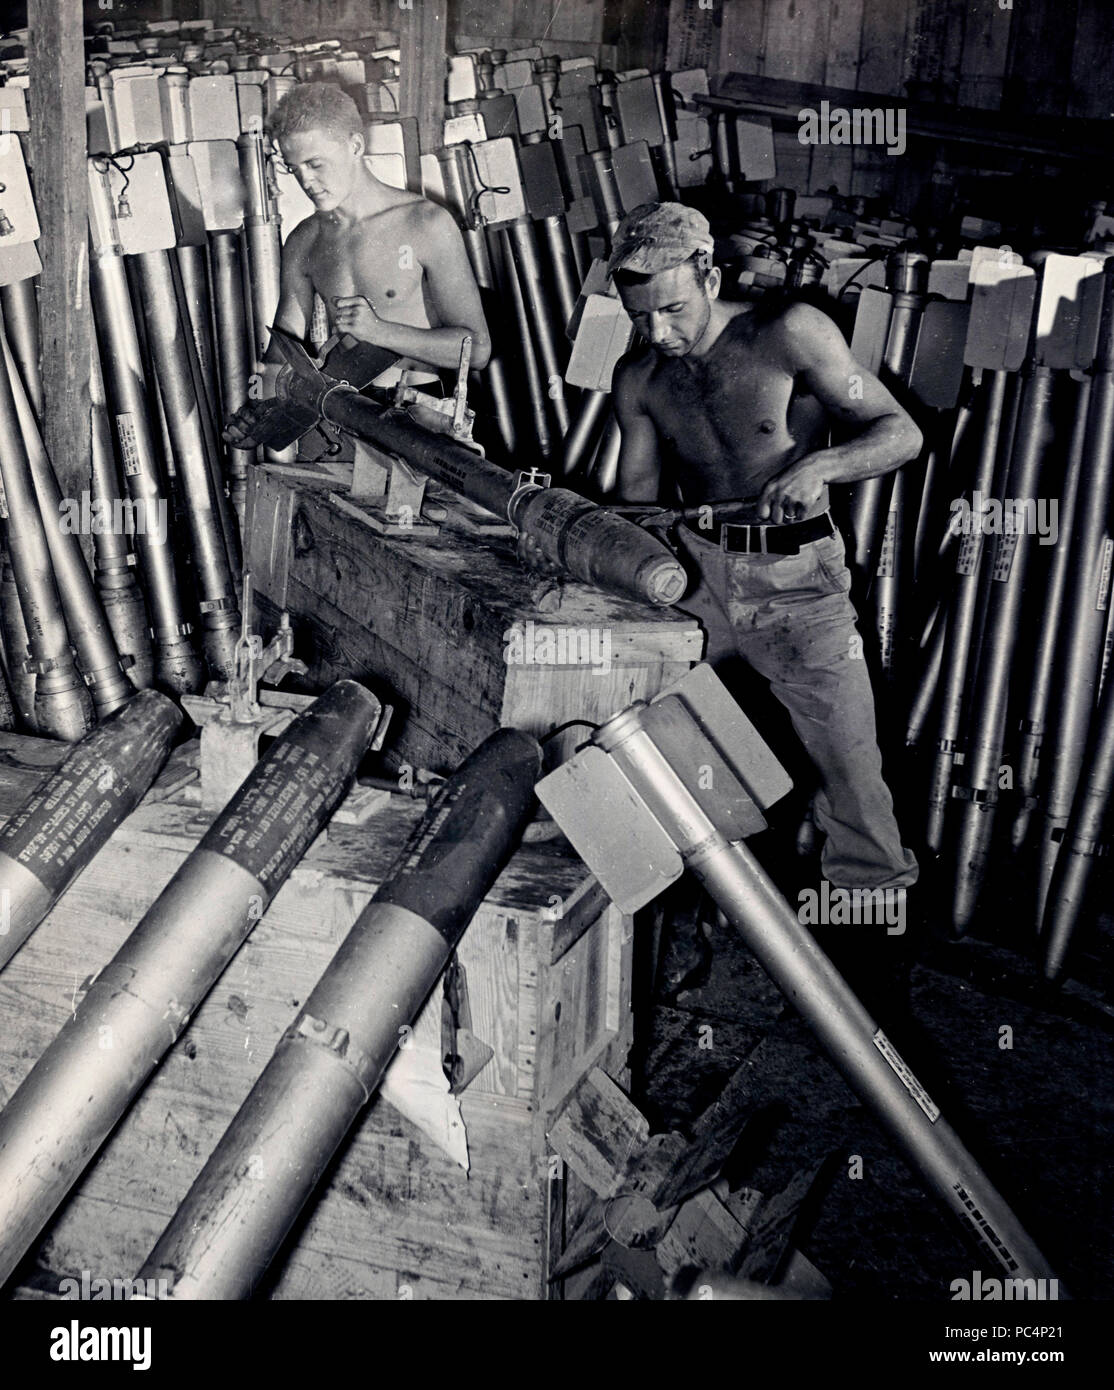 Okinawa - Ordinance Men of a Marine Air Group place fins and warheads on five inch projectiles Stock Photo